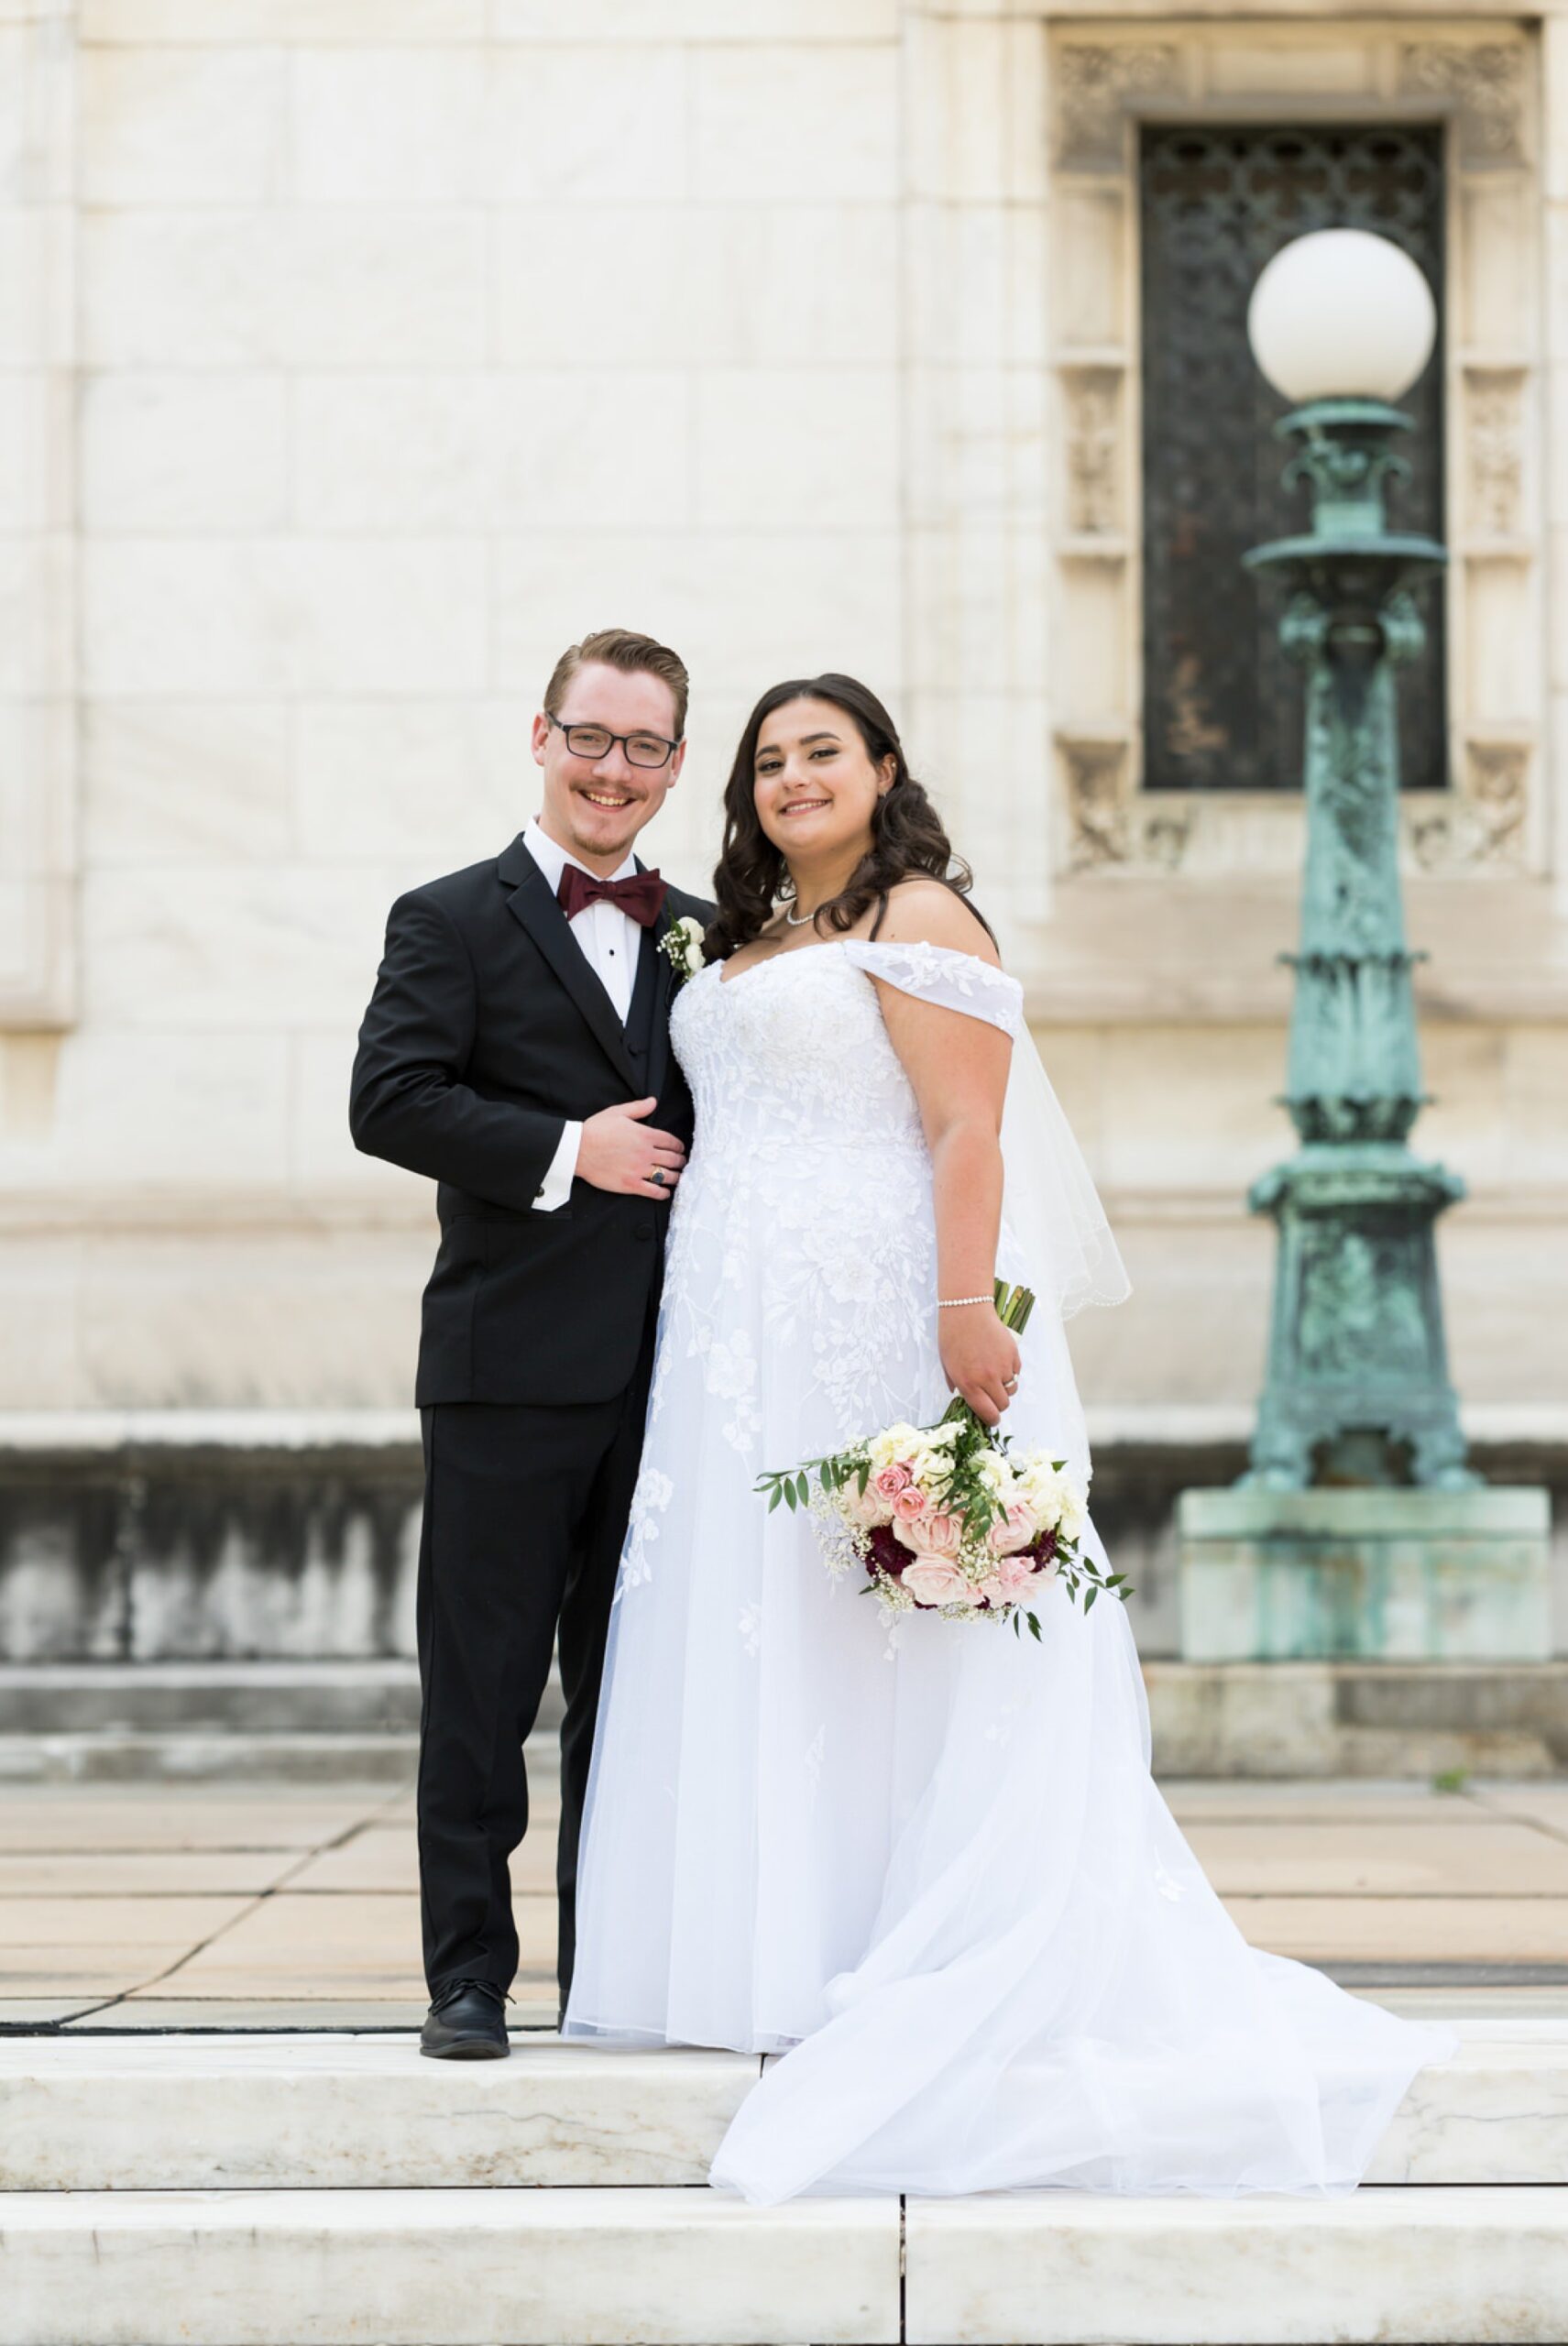 A bride and groom pose on their wedding day at the Detroit Public Library.  